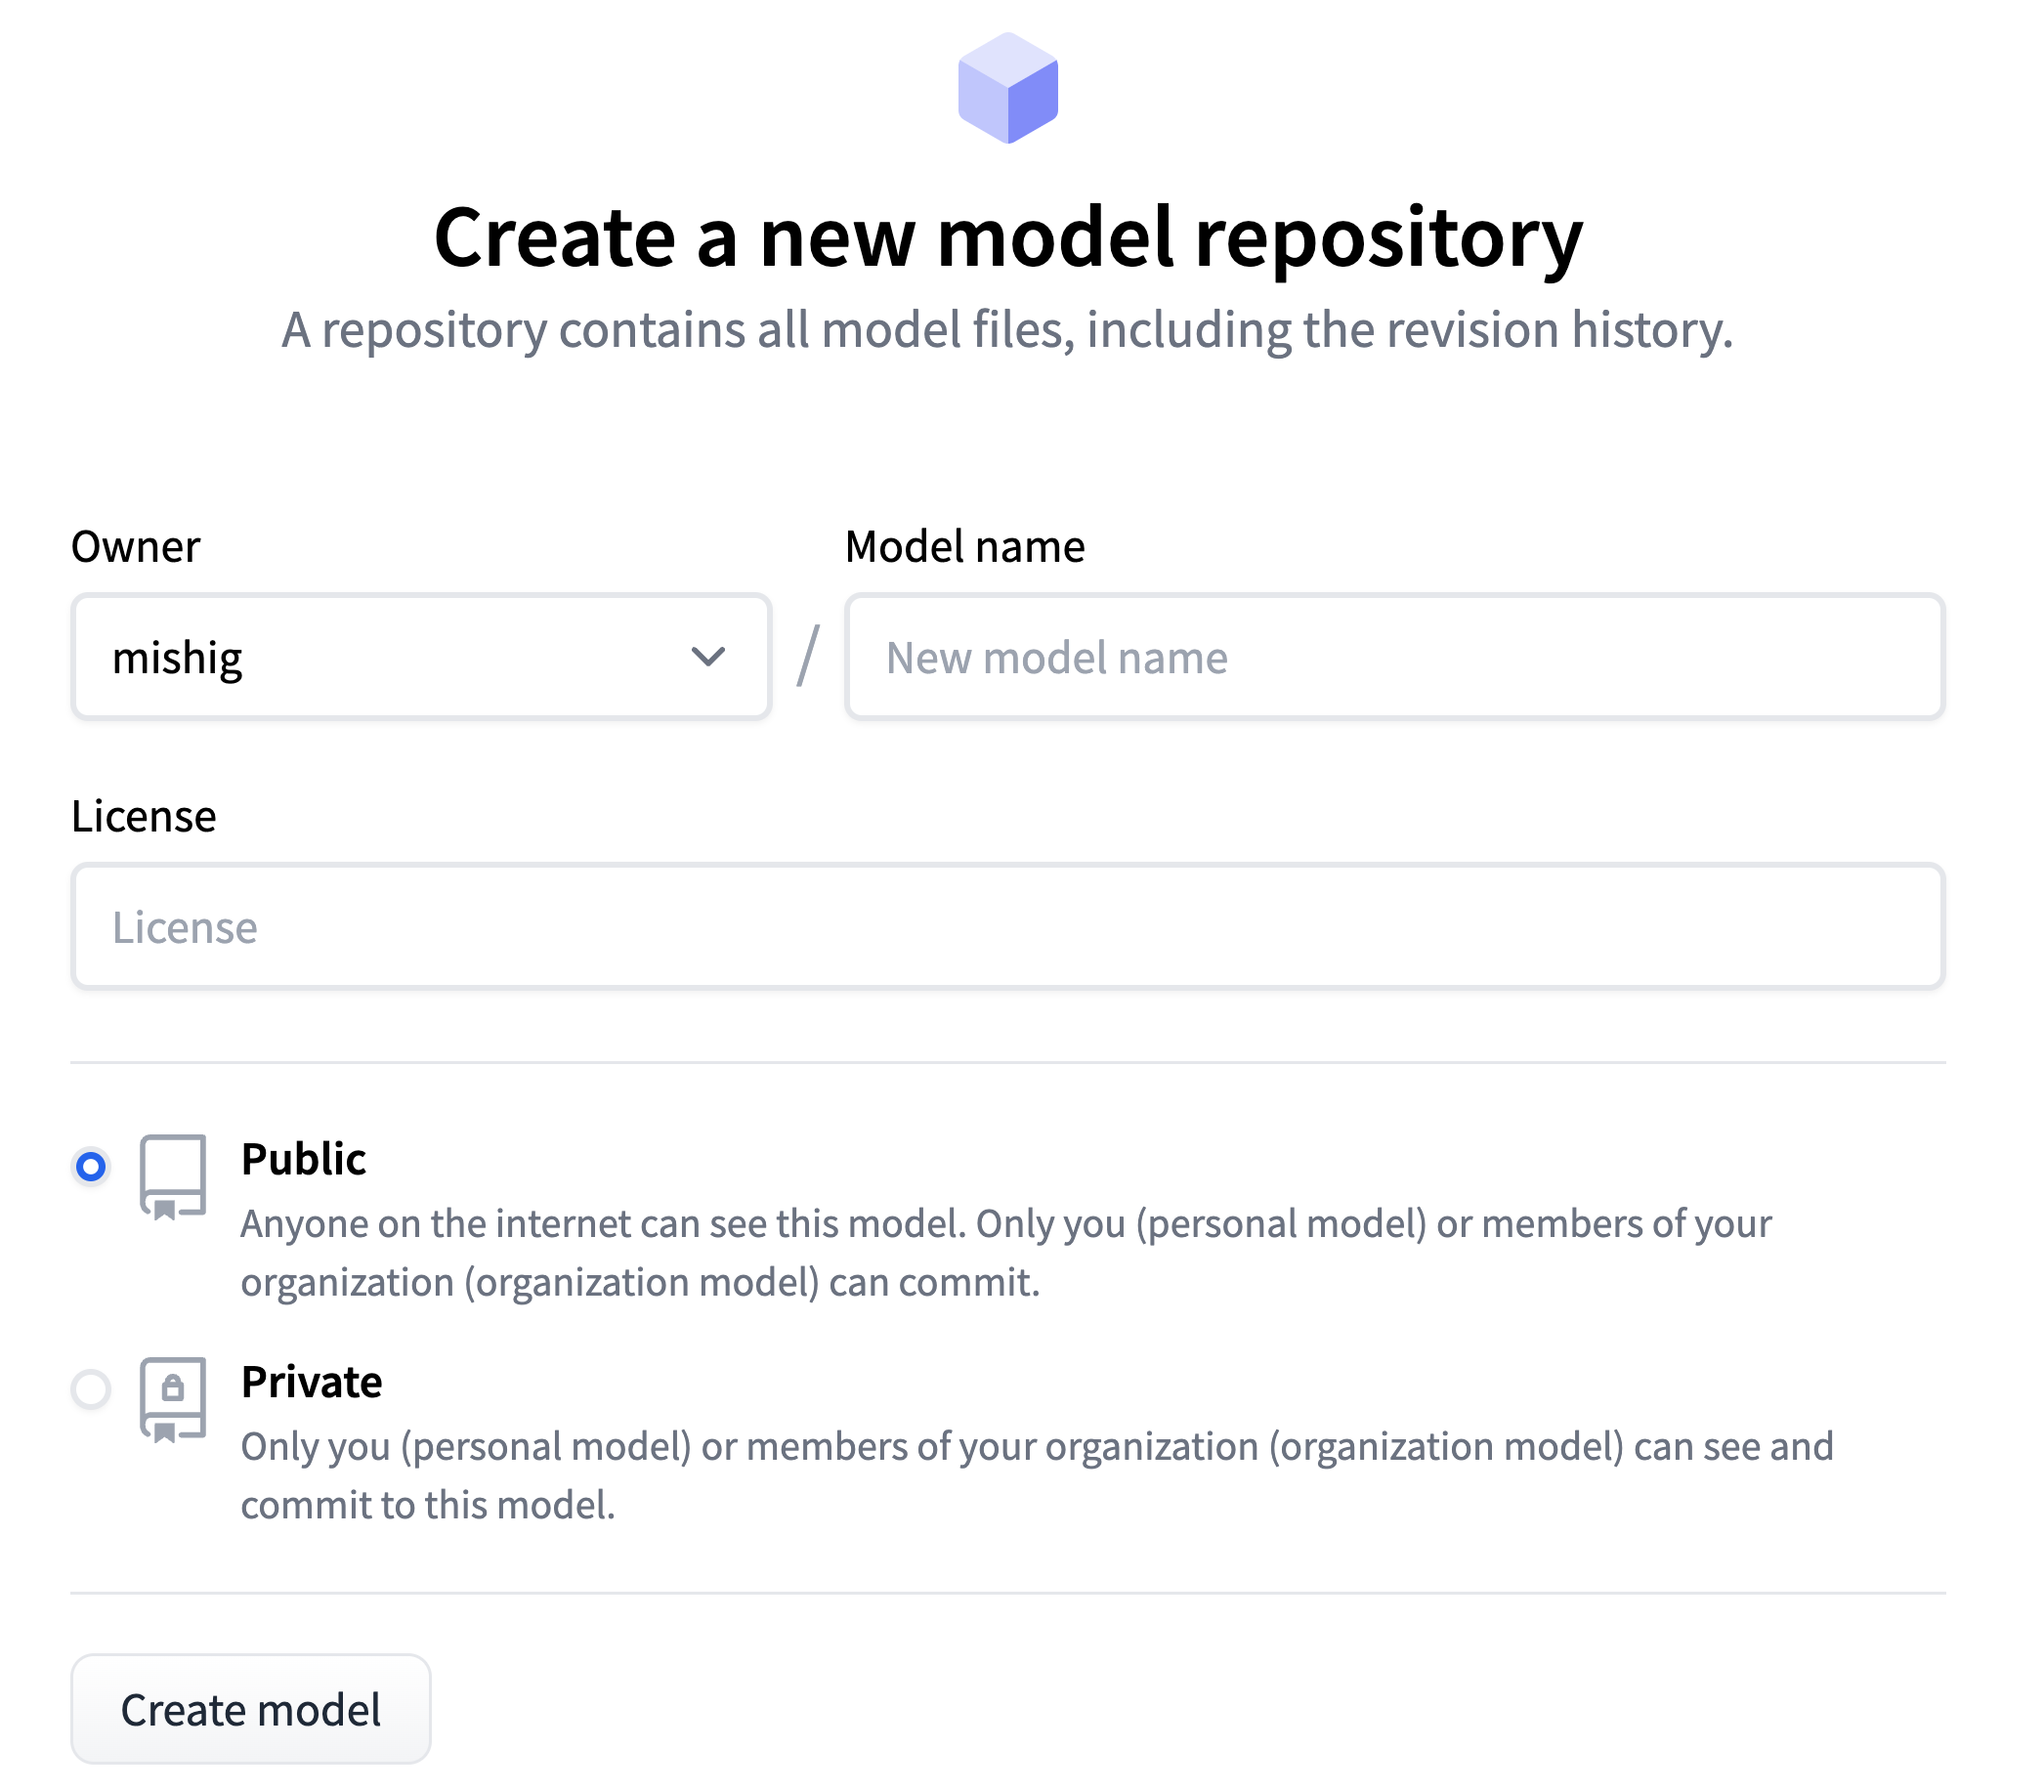 Getting Started with Repositories